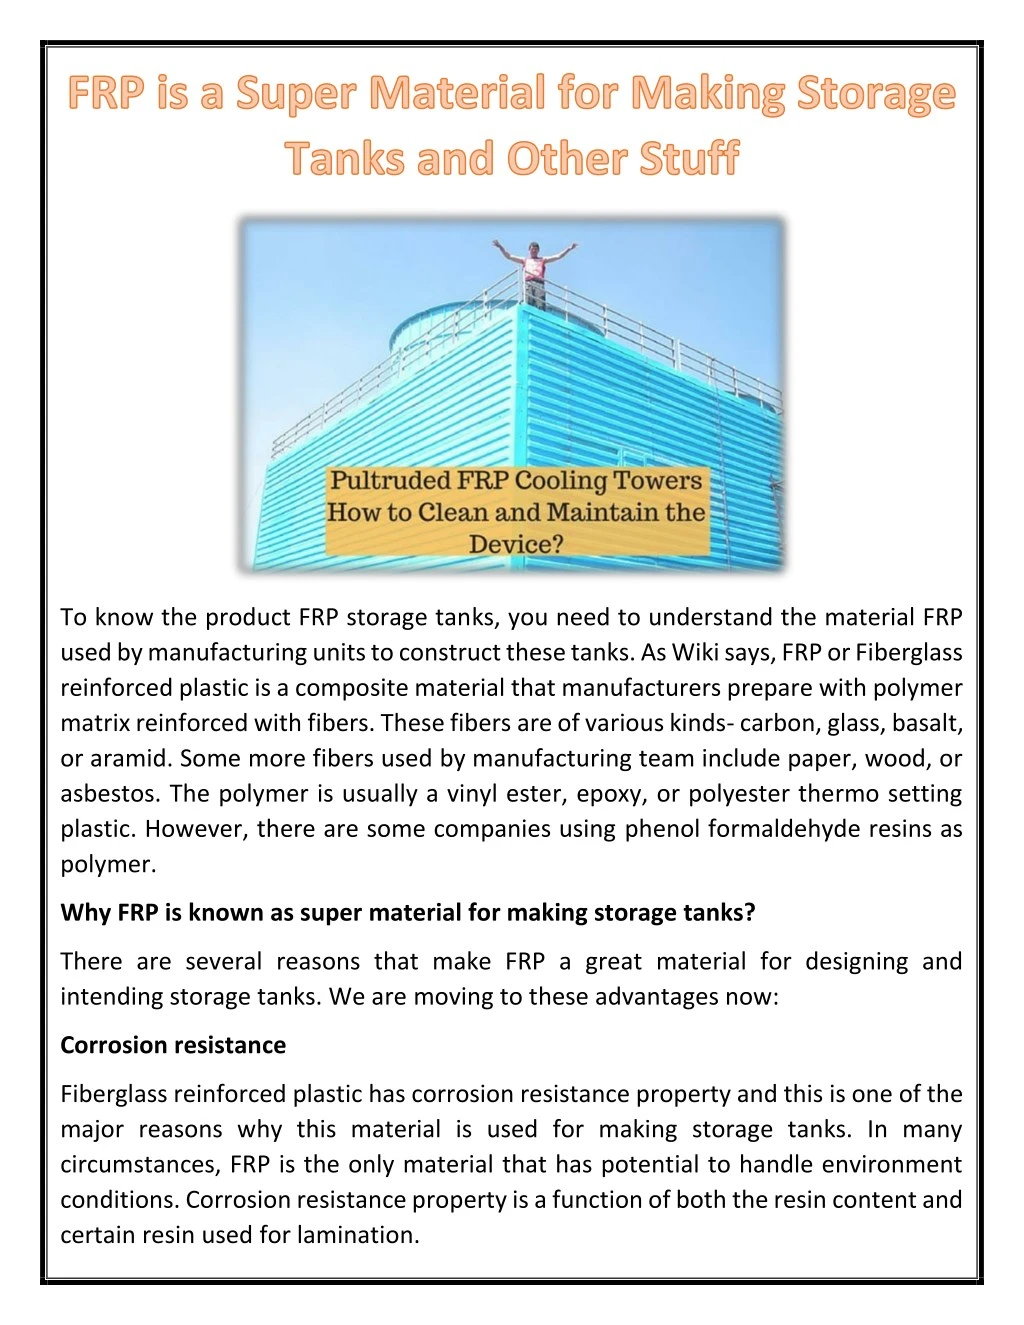 to know the product frp storage tanks you need